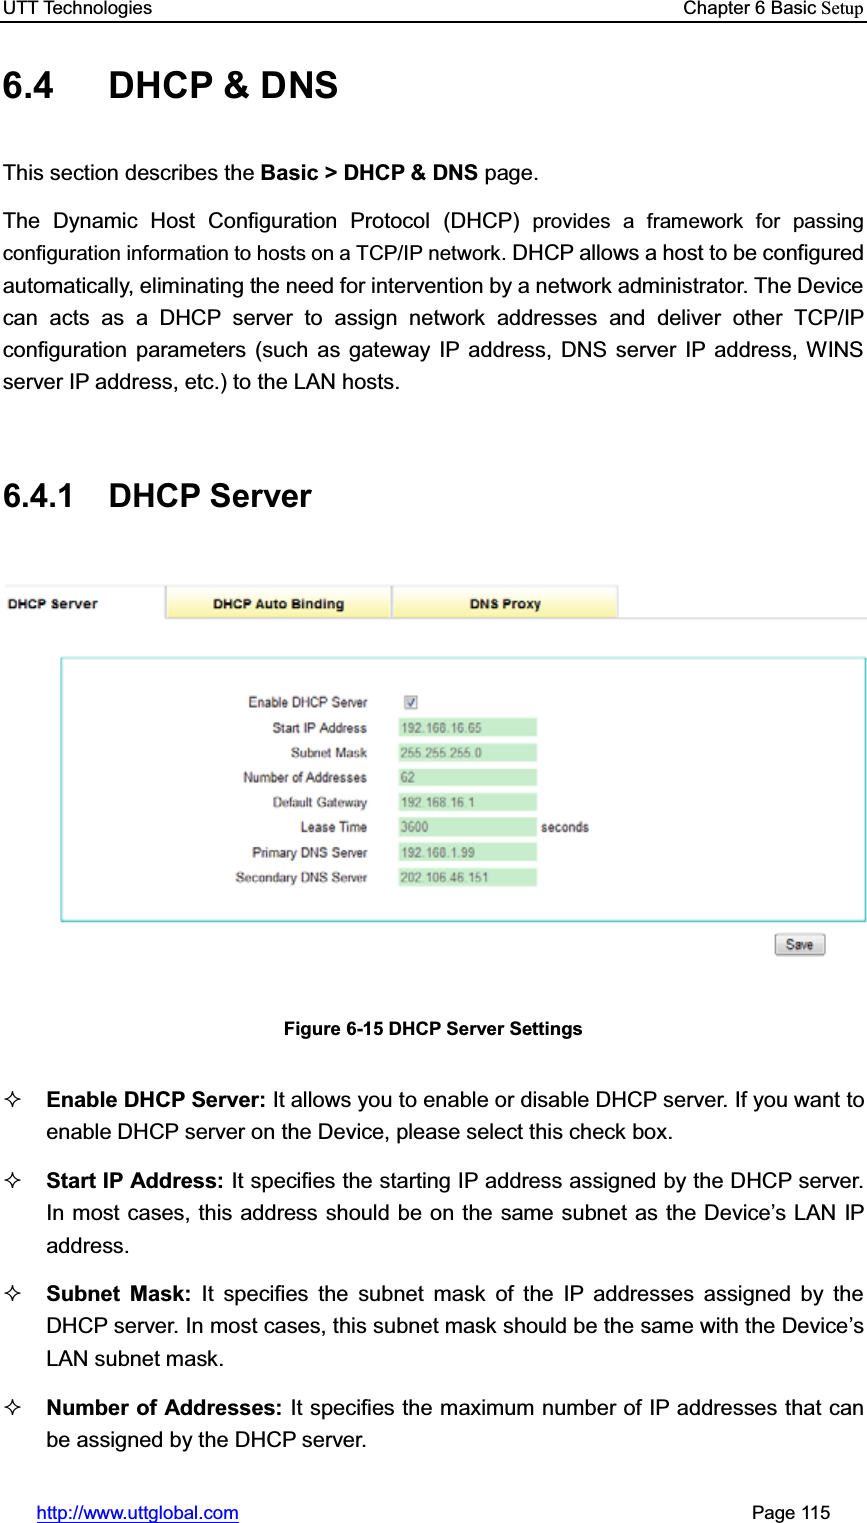 UTT Technologies    Chapter 6 Basic Setuphttp://www.uttglobal.com                                                       Page 115 6.4  DHCP &amp; DNS This section describes the Basic &gt; DHCP &amp; DNS page. The Dynamic Host Configuration Protocol (DHCP) provides a framework for passing configuration information to hosts on a TCP/IP network. DHCP allows a host to be configured automatically, eliminating the need for intervention by a network administrator. The Device can acts as a DHCP server to assign network addresses and deliver other TCP/IP configuration parameters (such as gateway IP address, DNS server IP address, WINS server IP address, etc.) to the LAN hosts.   6.4.1 DHCP Server Figure 6-15 DHCP Server Settings Enable DHCP Server: It allows you to enable or disable DHCP server. If you want to enable DHCP server on the Device, please select this check box. Start IP Address: It specifies the starting IP address assigned by the DHCP server. In most cases, this address should be on the same subnet as the Device¶s LAN IP address. Subnet Mask: It specifies the subnet mask of the IP addresses assigned by the DHCP server. In most cases, this subnet mask should be the same with the Device¶sLAN subnet mask. Number of Addresses: It specifies the maximum number of IP addresses that can be assigned by the DHCP server.   